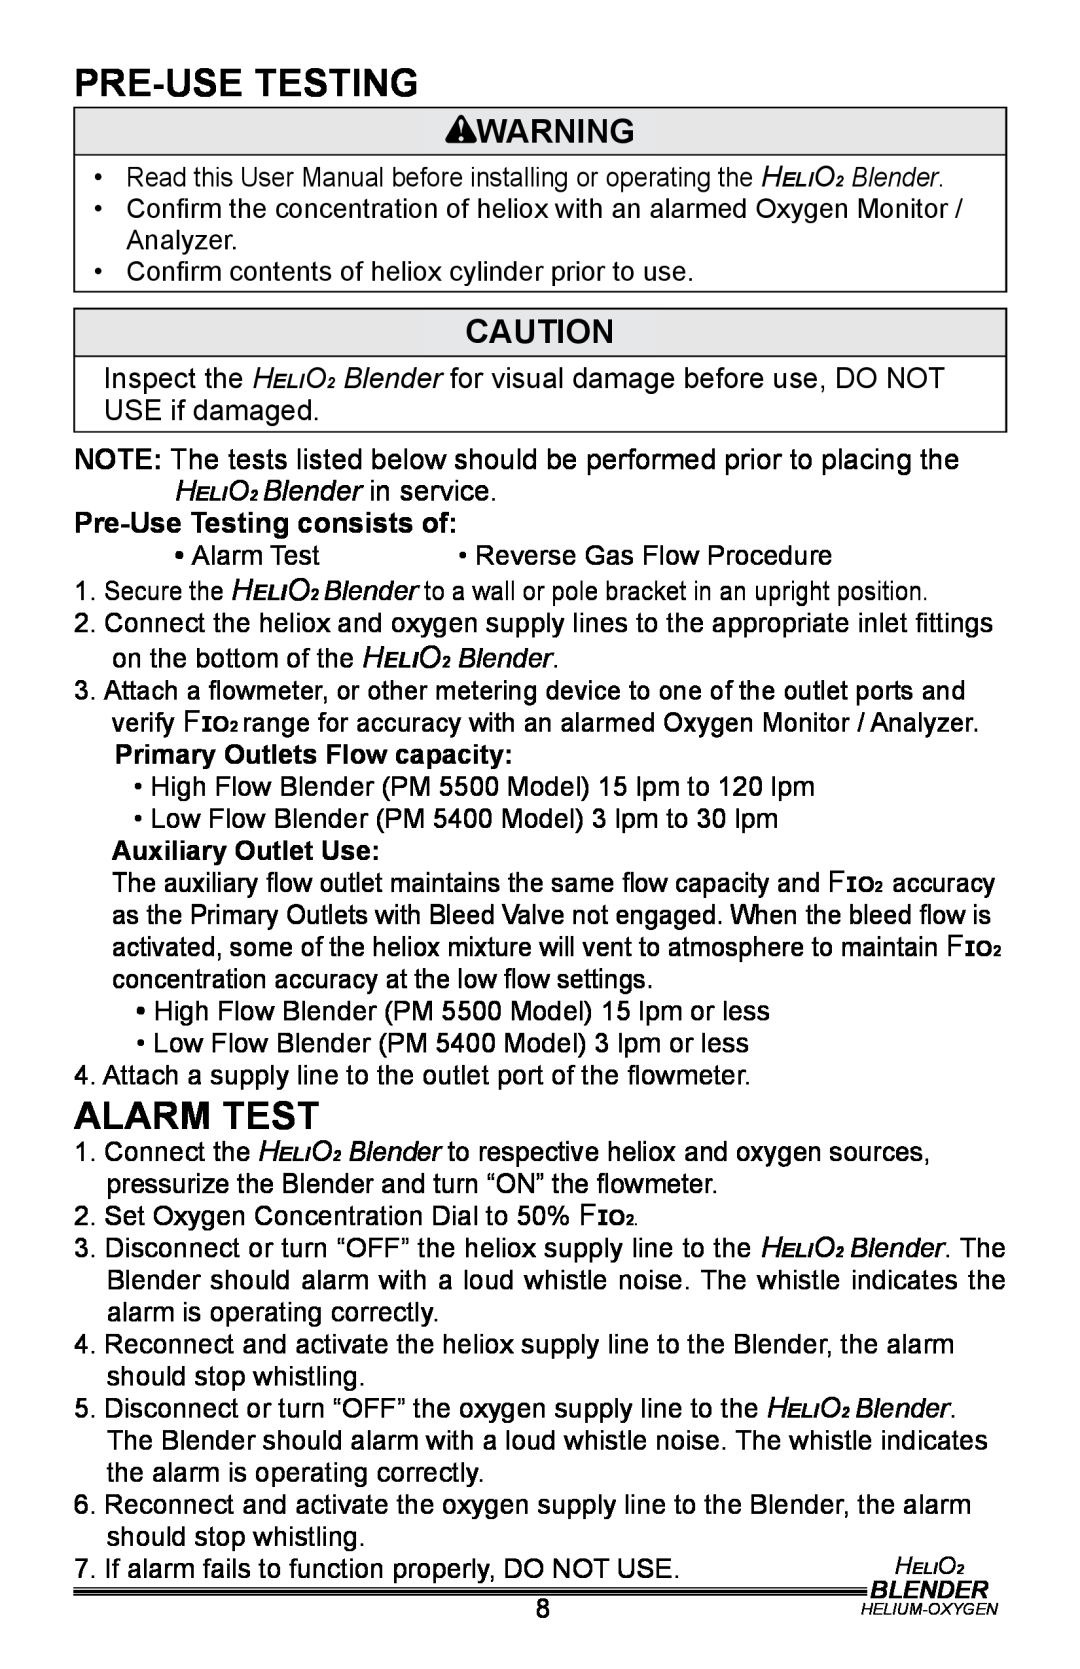 Helio PM5400, PM5500 user manual Pre-usetesting, Alarm Test, Pre-UseTesting consists of 